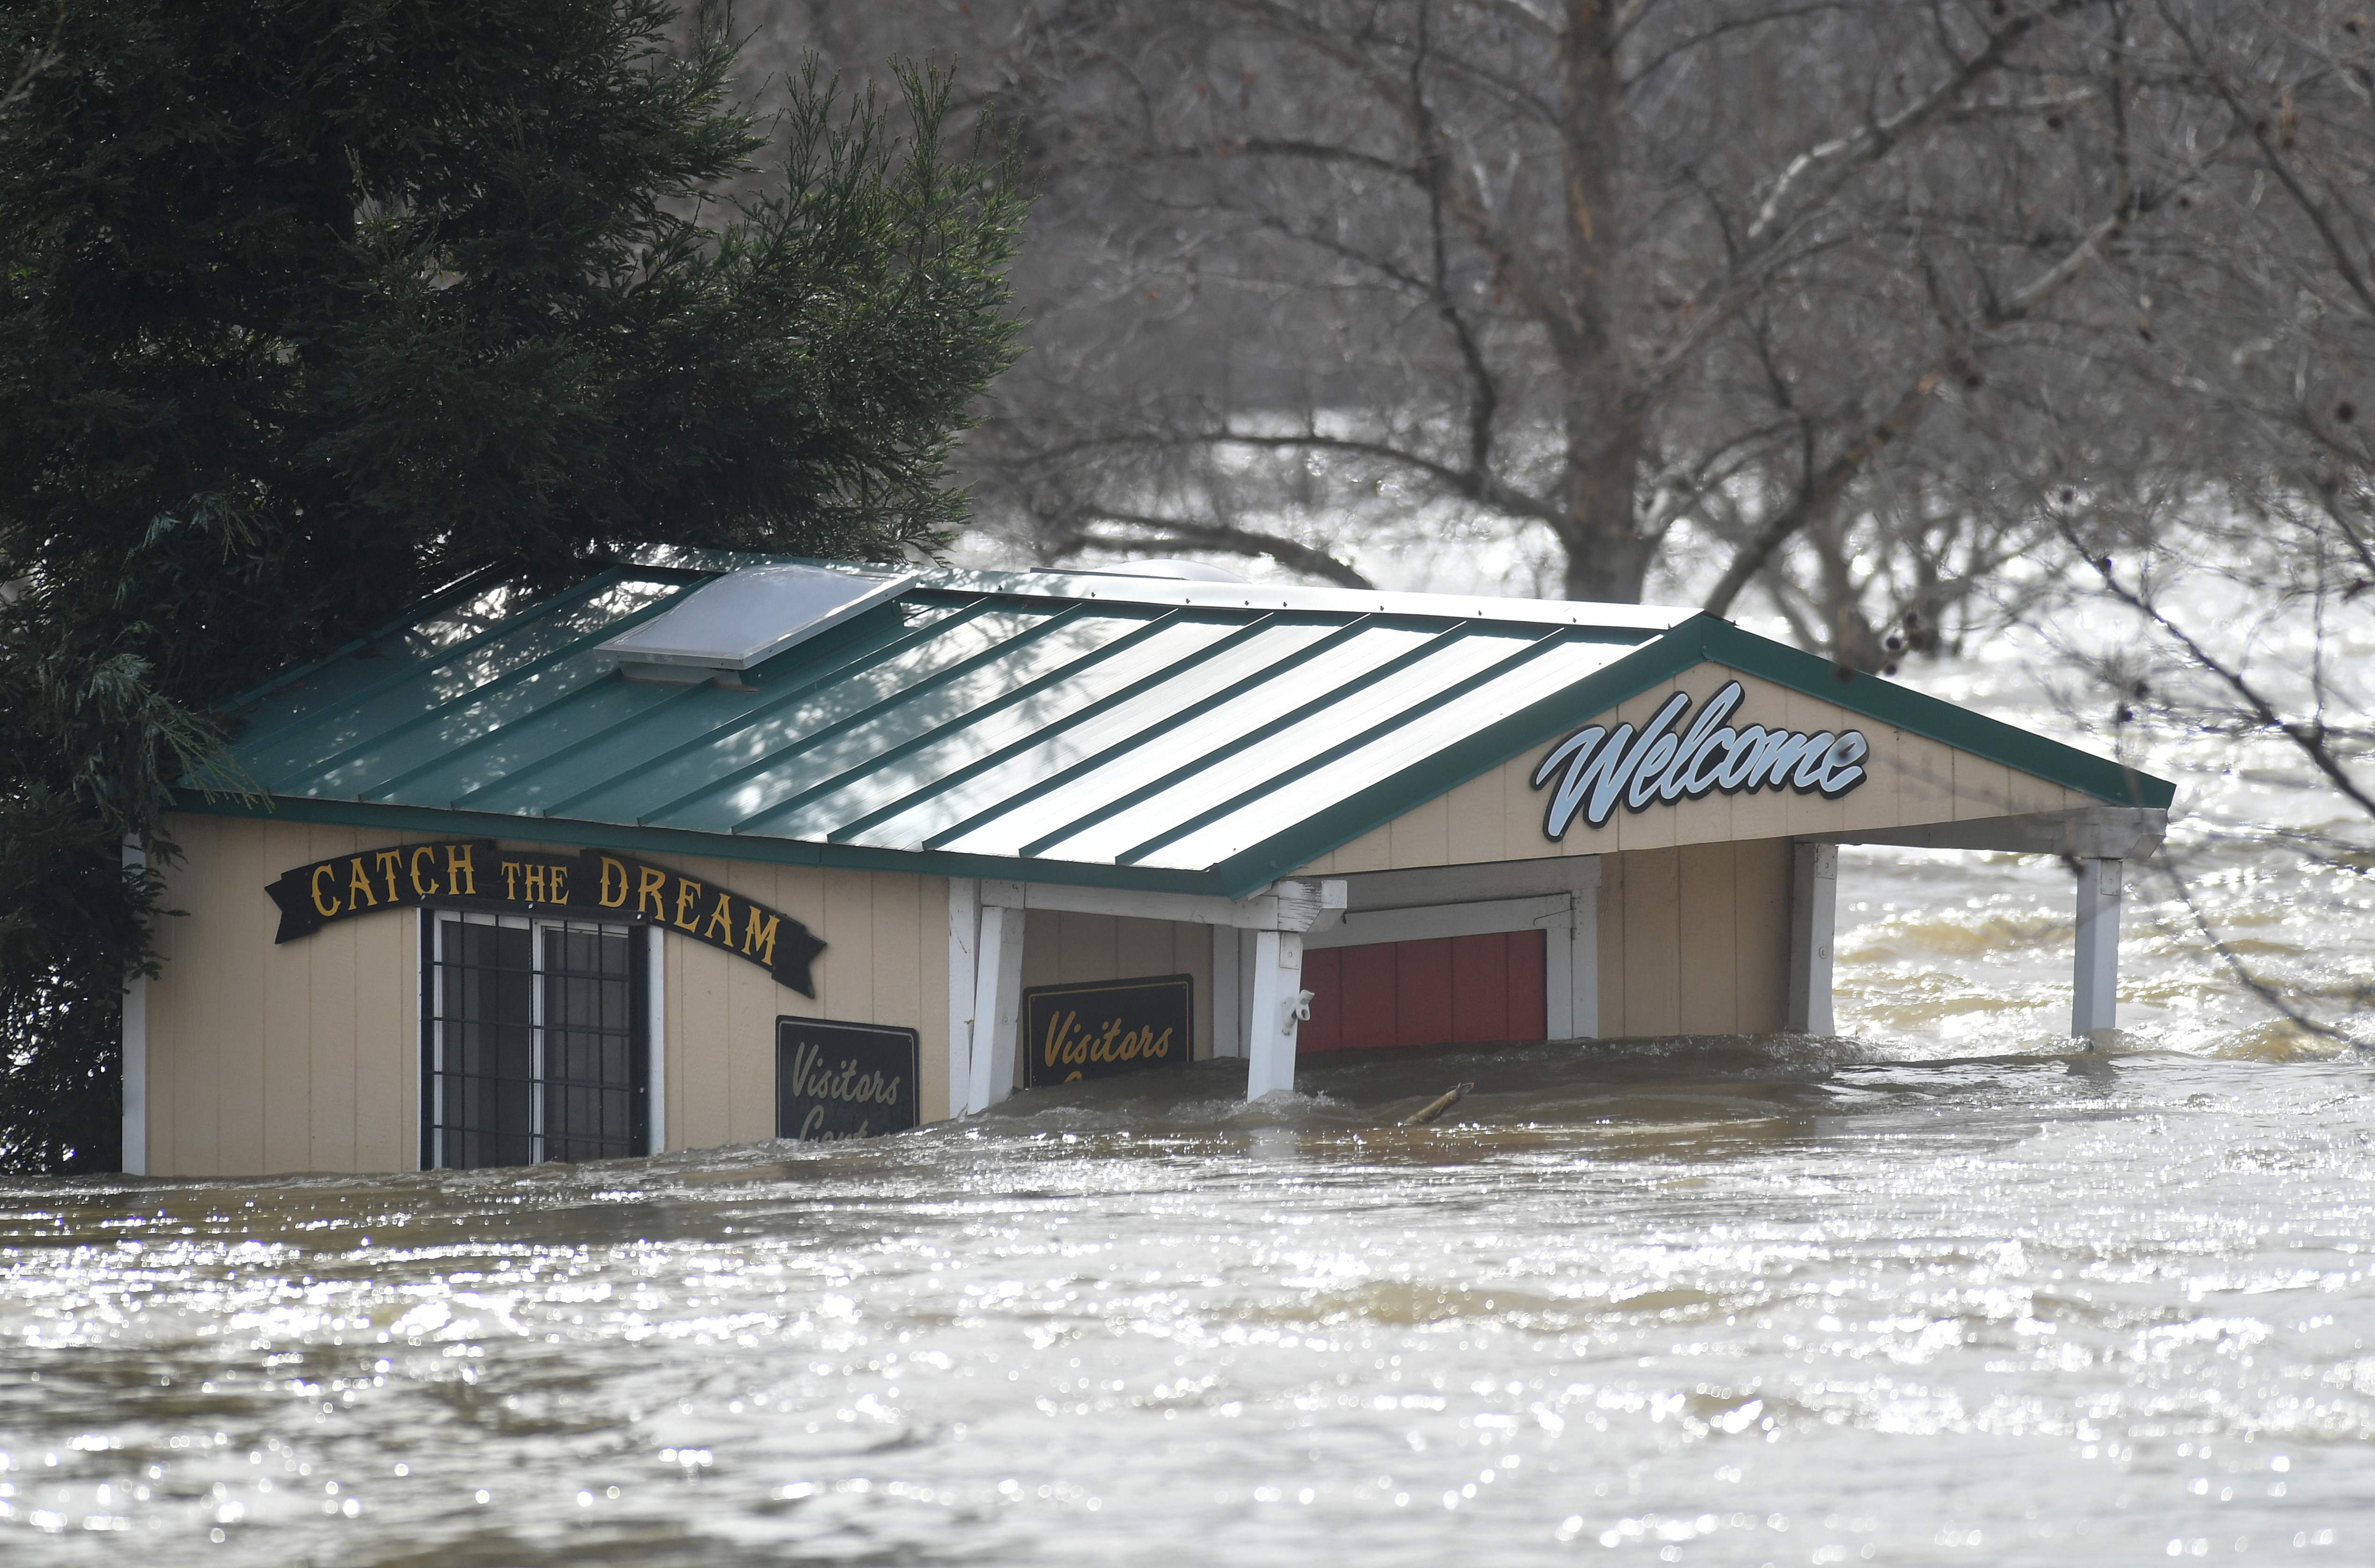 California&apos;s wild extremes of drought and floods to worsen as climate warms